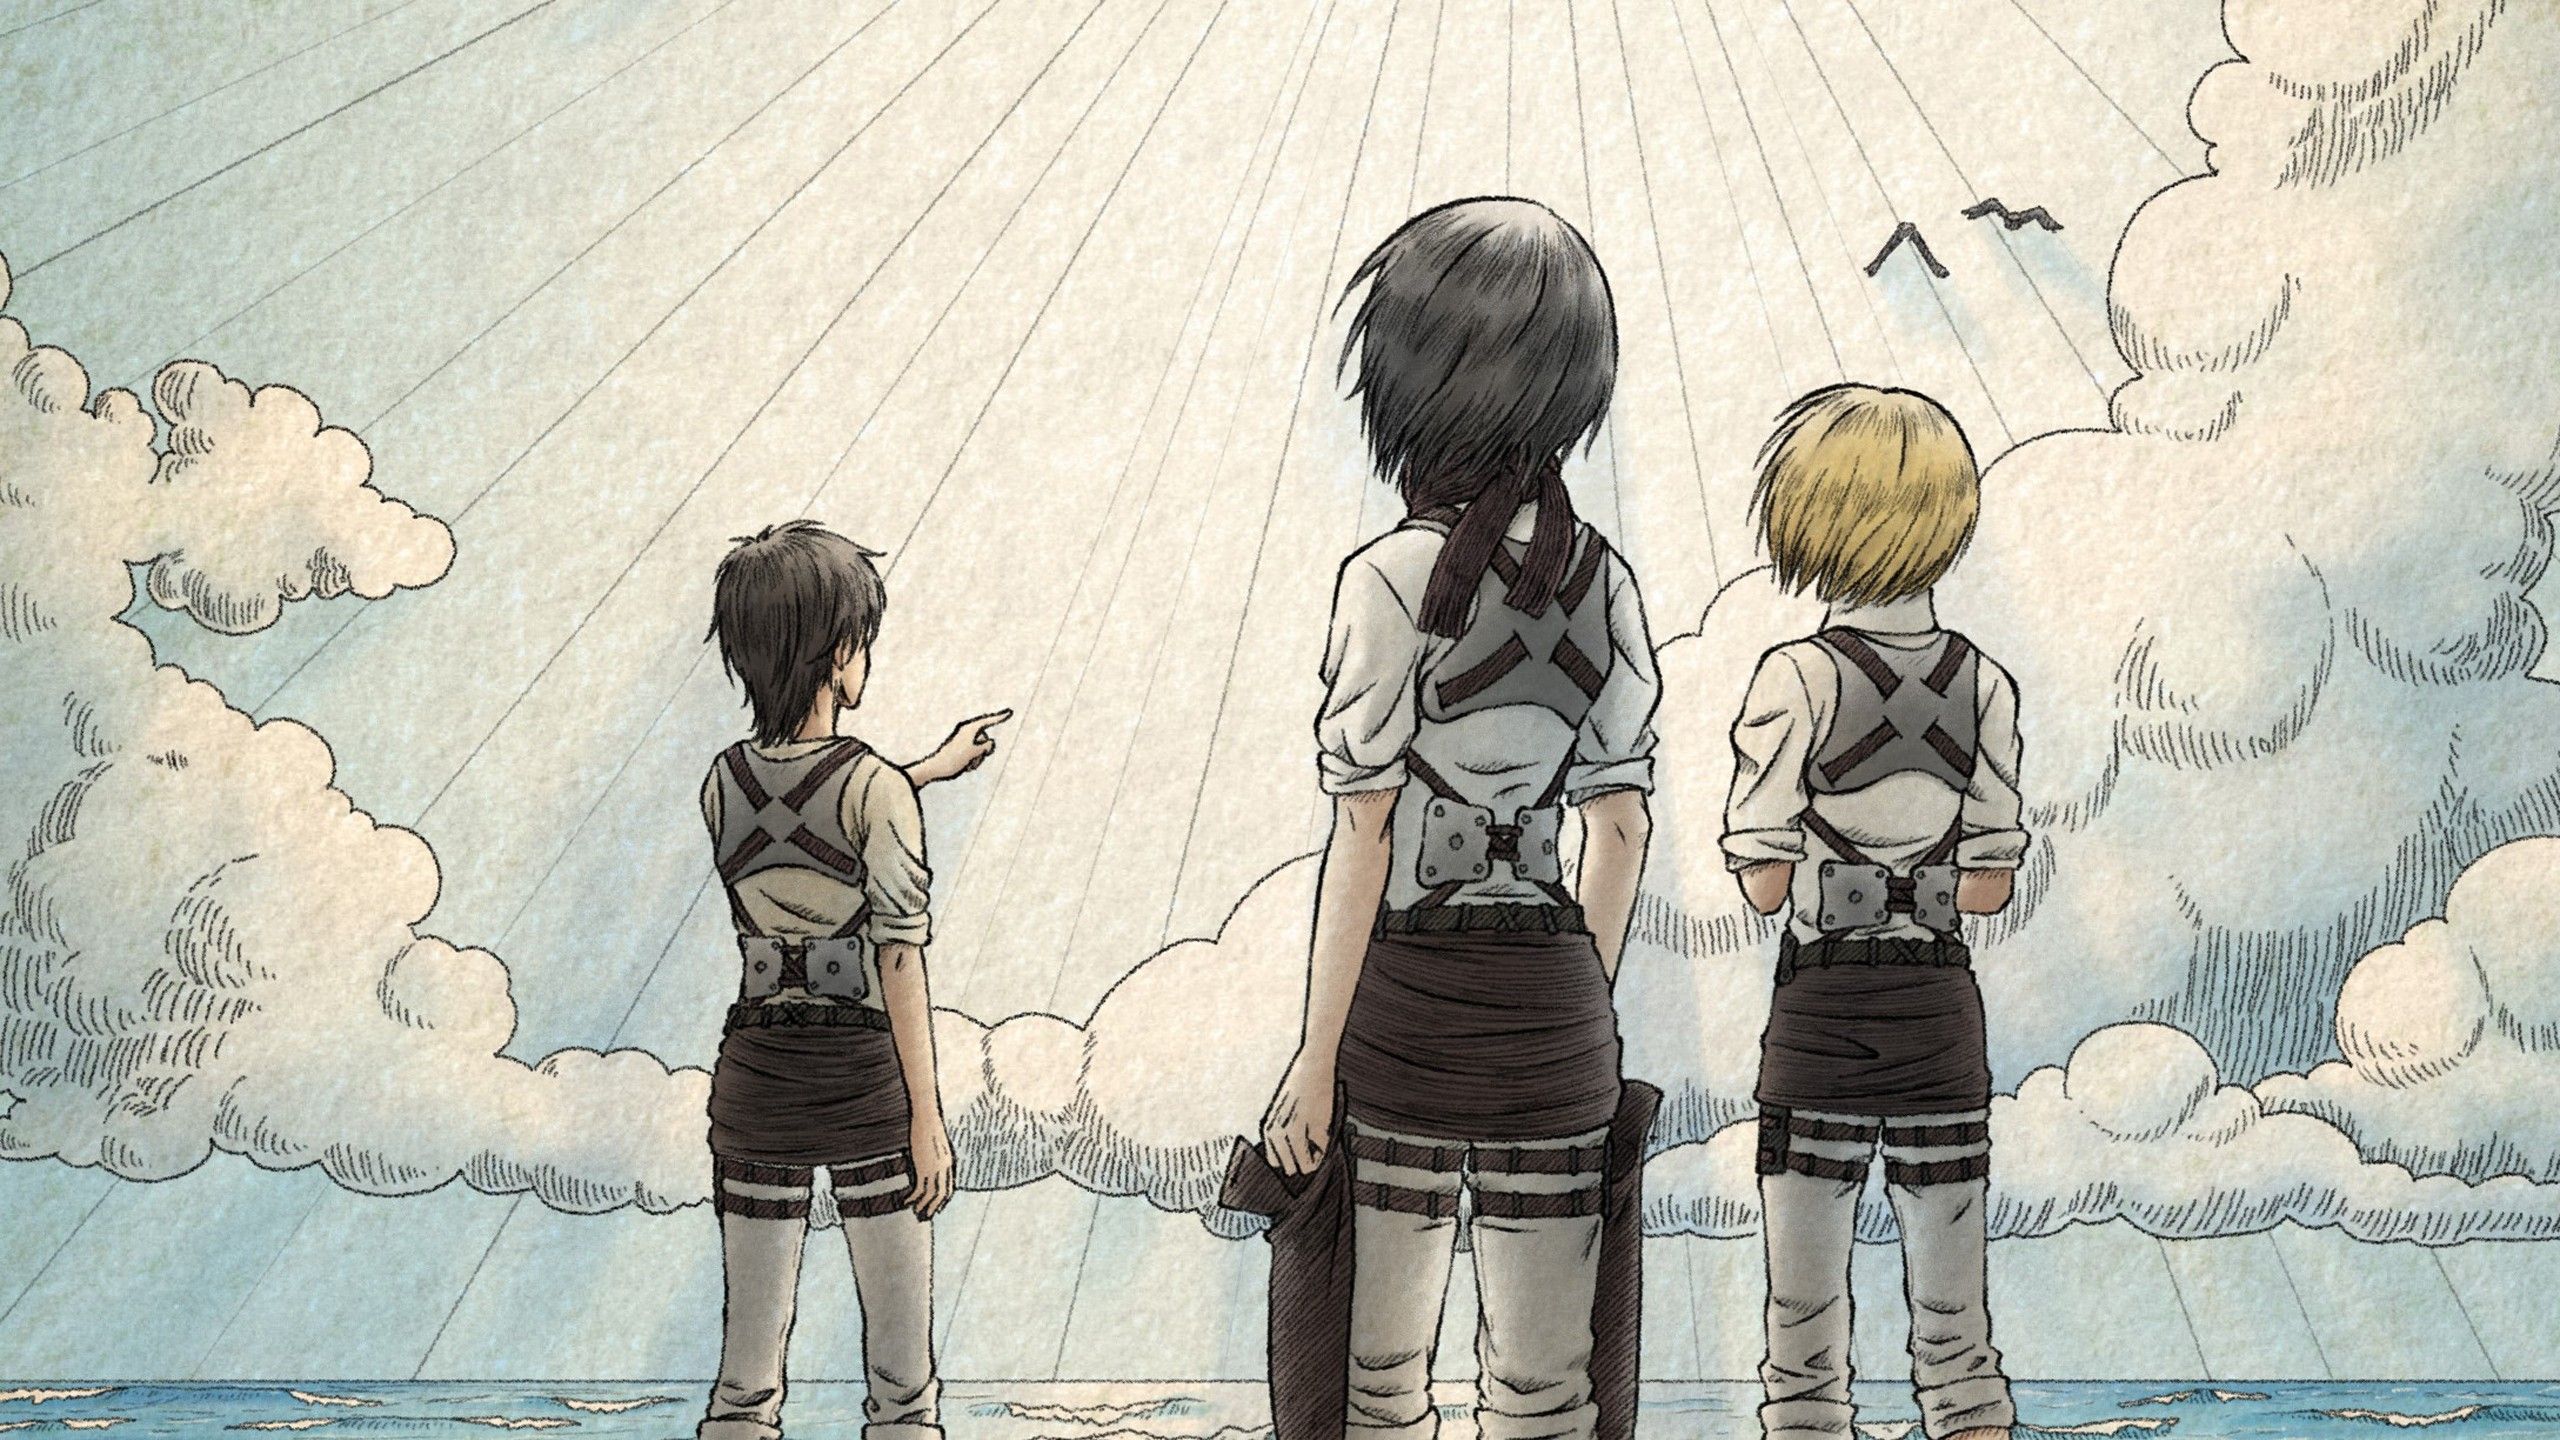 Attack On Titan Back View Armin Arlert Eren Yeager Mikasa Ackerman Standing On Beach With Background Of Sky And Clouds HD Anime Wallpaper